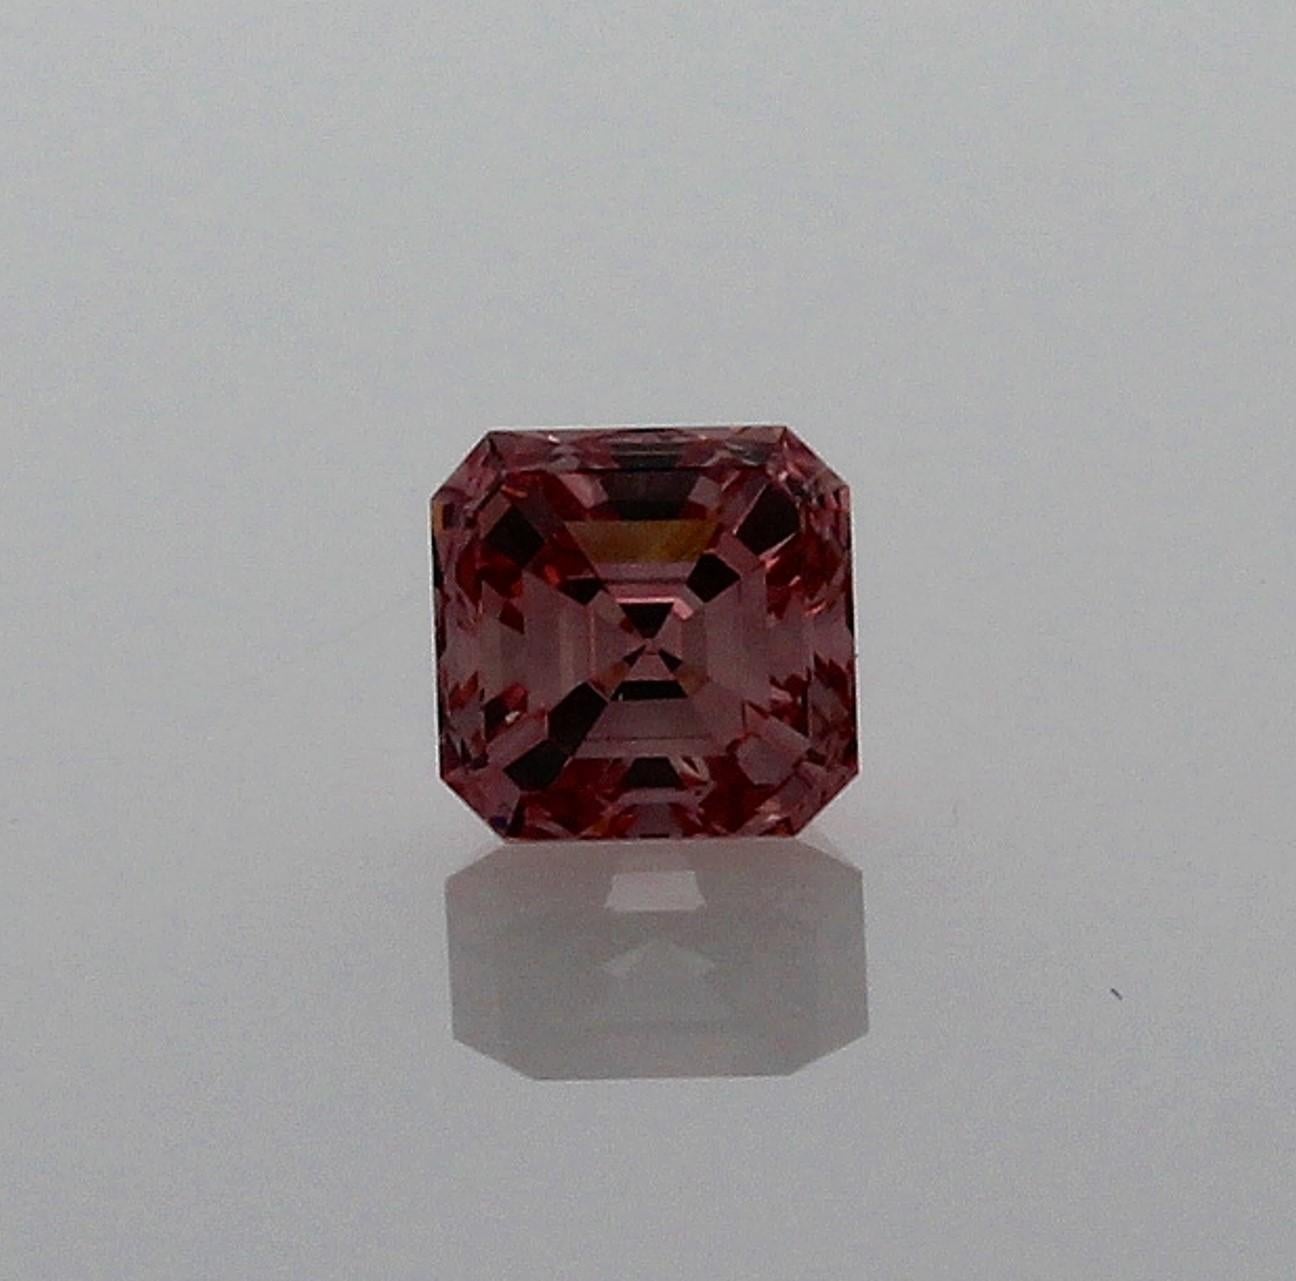 Incredible Deal on GIA Certified 0.55 Carat Square Emerald Cut, Natural Fancy Intense Pink Even,  VS1 Clarity Diamond, measuring 4.62-4.55x3.10
This is a very beautiful and rare diamond. The Square Emerald Cut has a very strong and intense color.